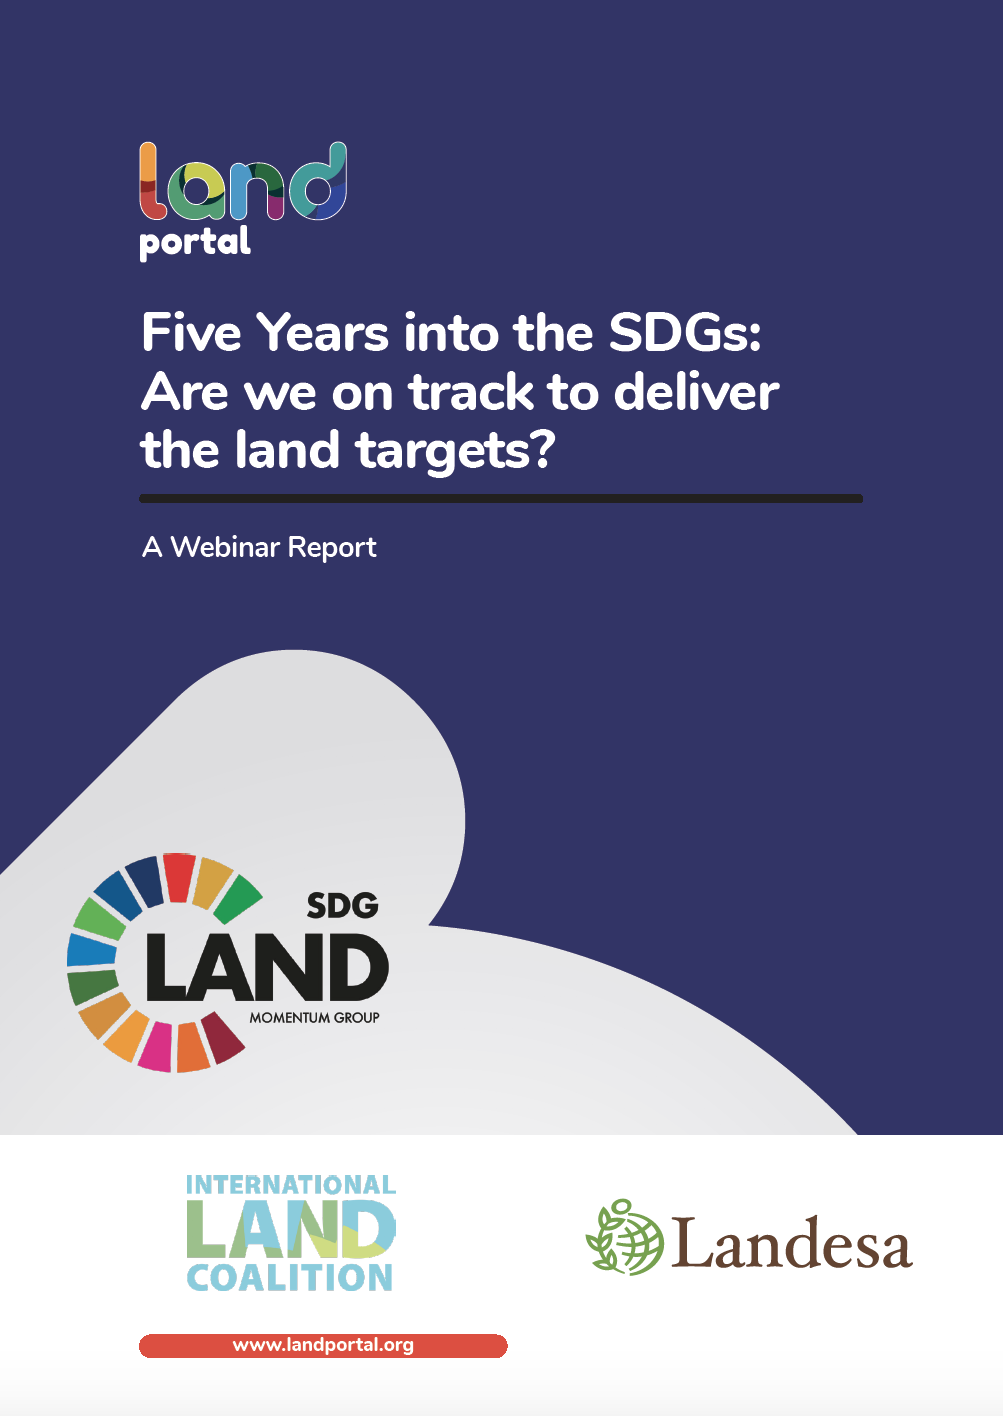 Five Years into the SDGs: Are we on track to deliver the land targets?